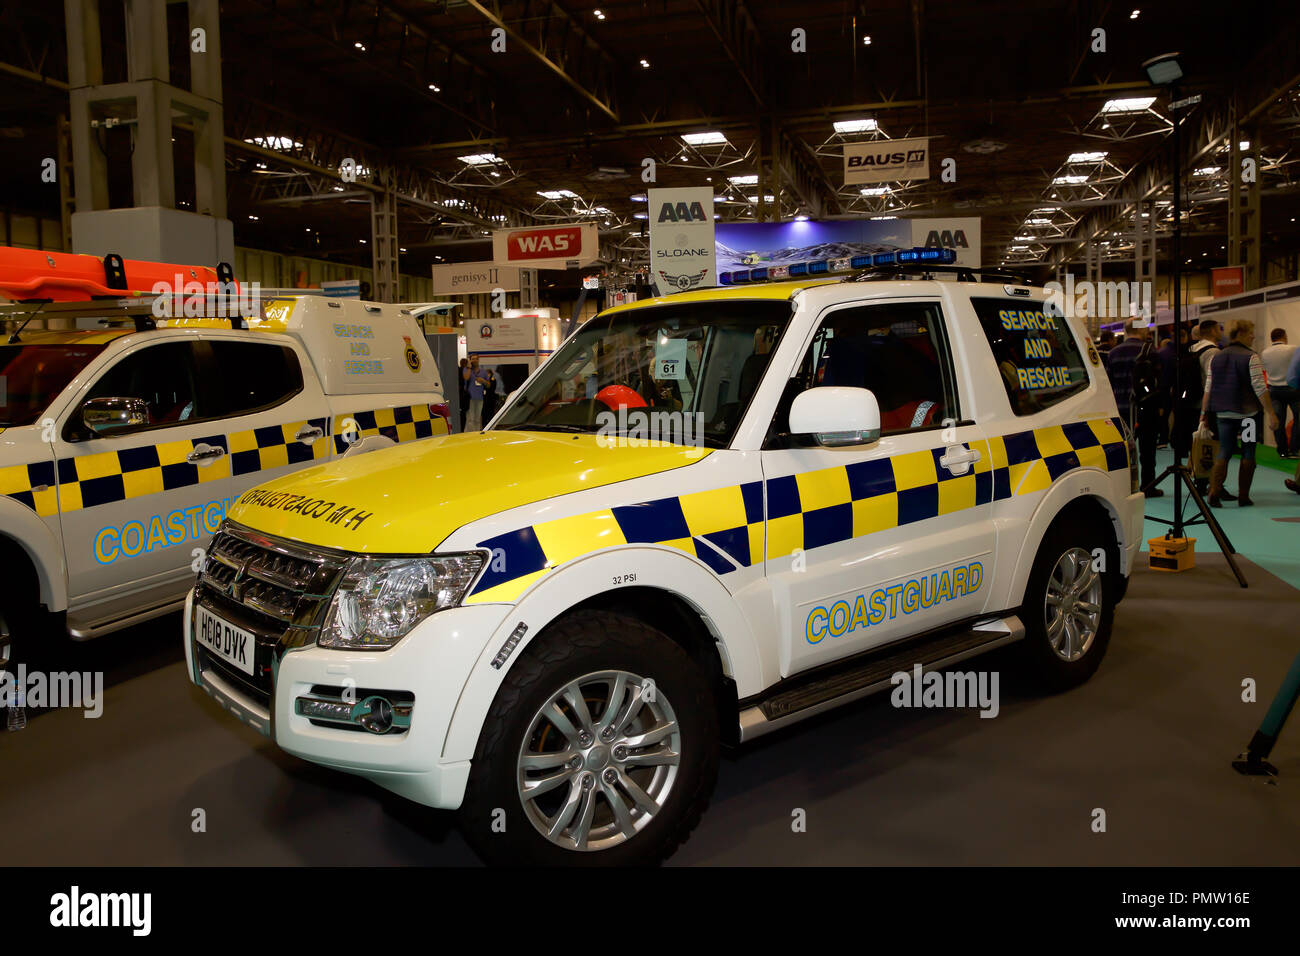 Birmingham,UK,19th September 2018,The Emergency Services Show takes place at the NEC in Birmingham. It runs for 2 days and offers ALL emergency workers a great place to network and learn with over 450 Exhibitors and many service vehicles on display inside and outdoors. There are also many free seminars covering different subjects, all in all a interesting and educational day out. Credit: Keith Larby/Alamy Live News Stock Photo